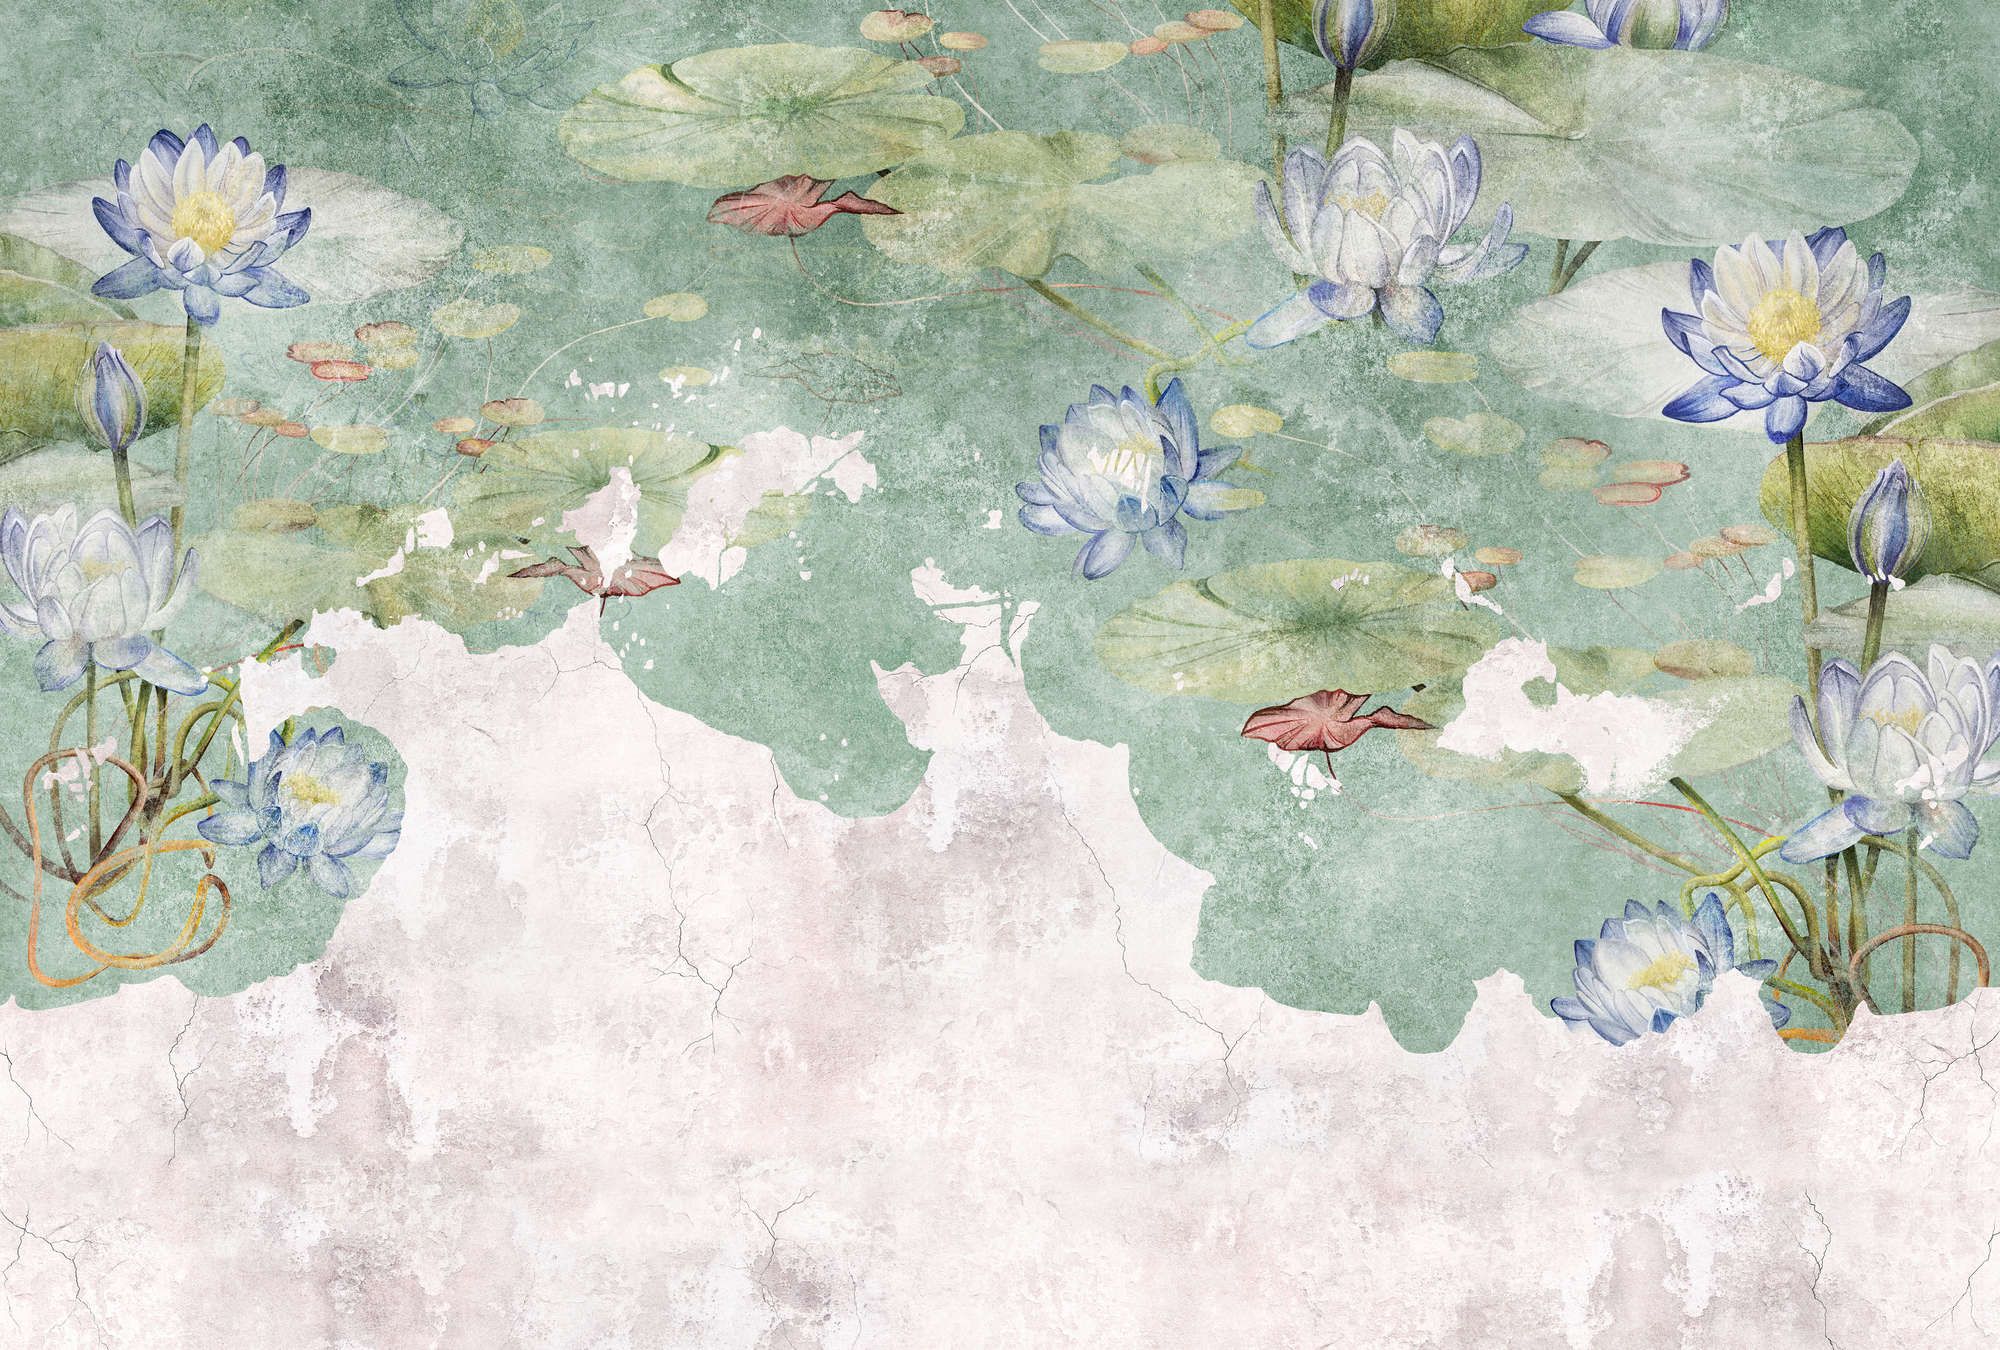             Photo wallpaper »lily« - Water lilies on vintage plaster texture in the background - Smooth, slightly pearlescent non-woven fabric
        